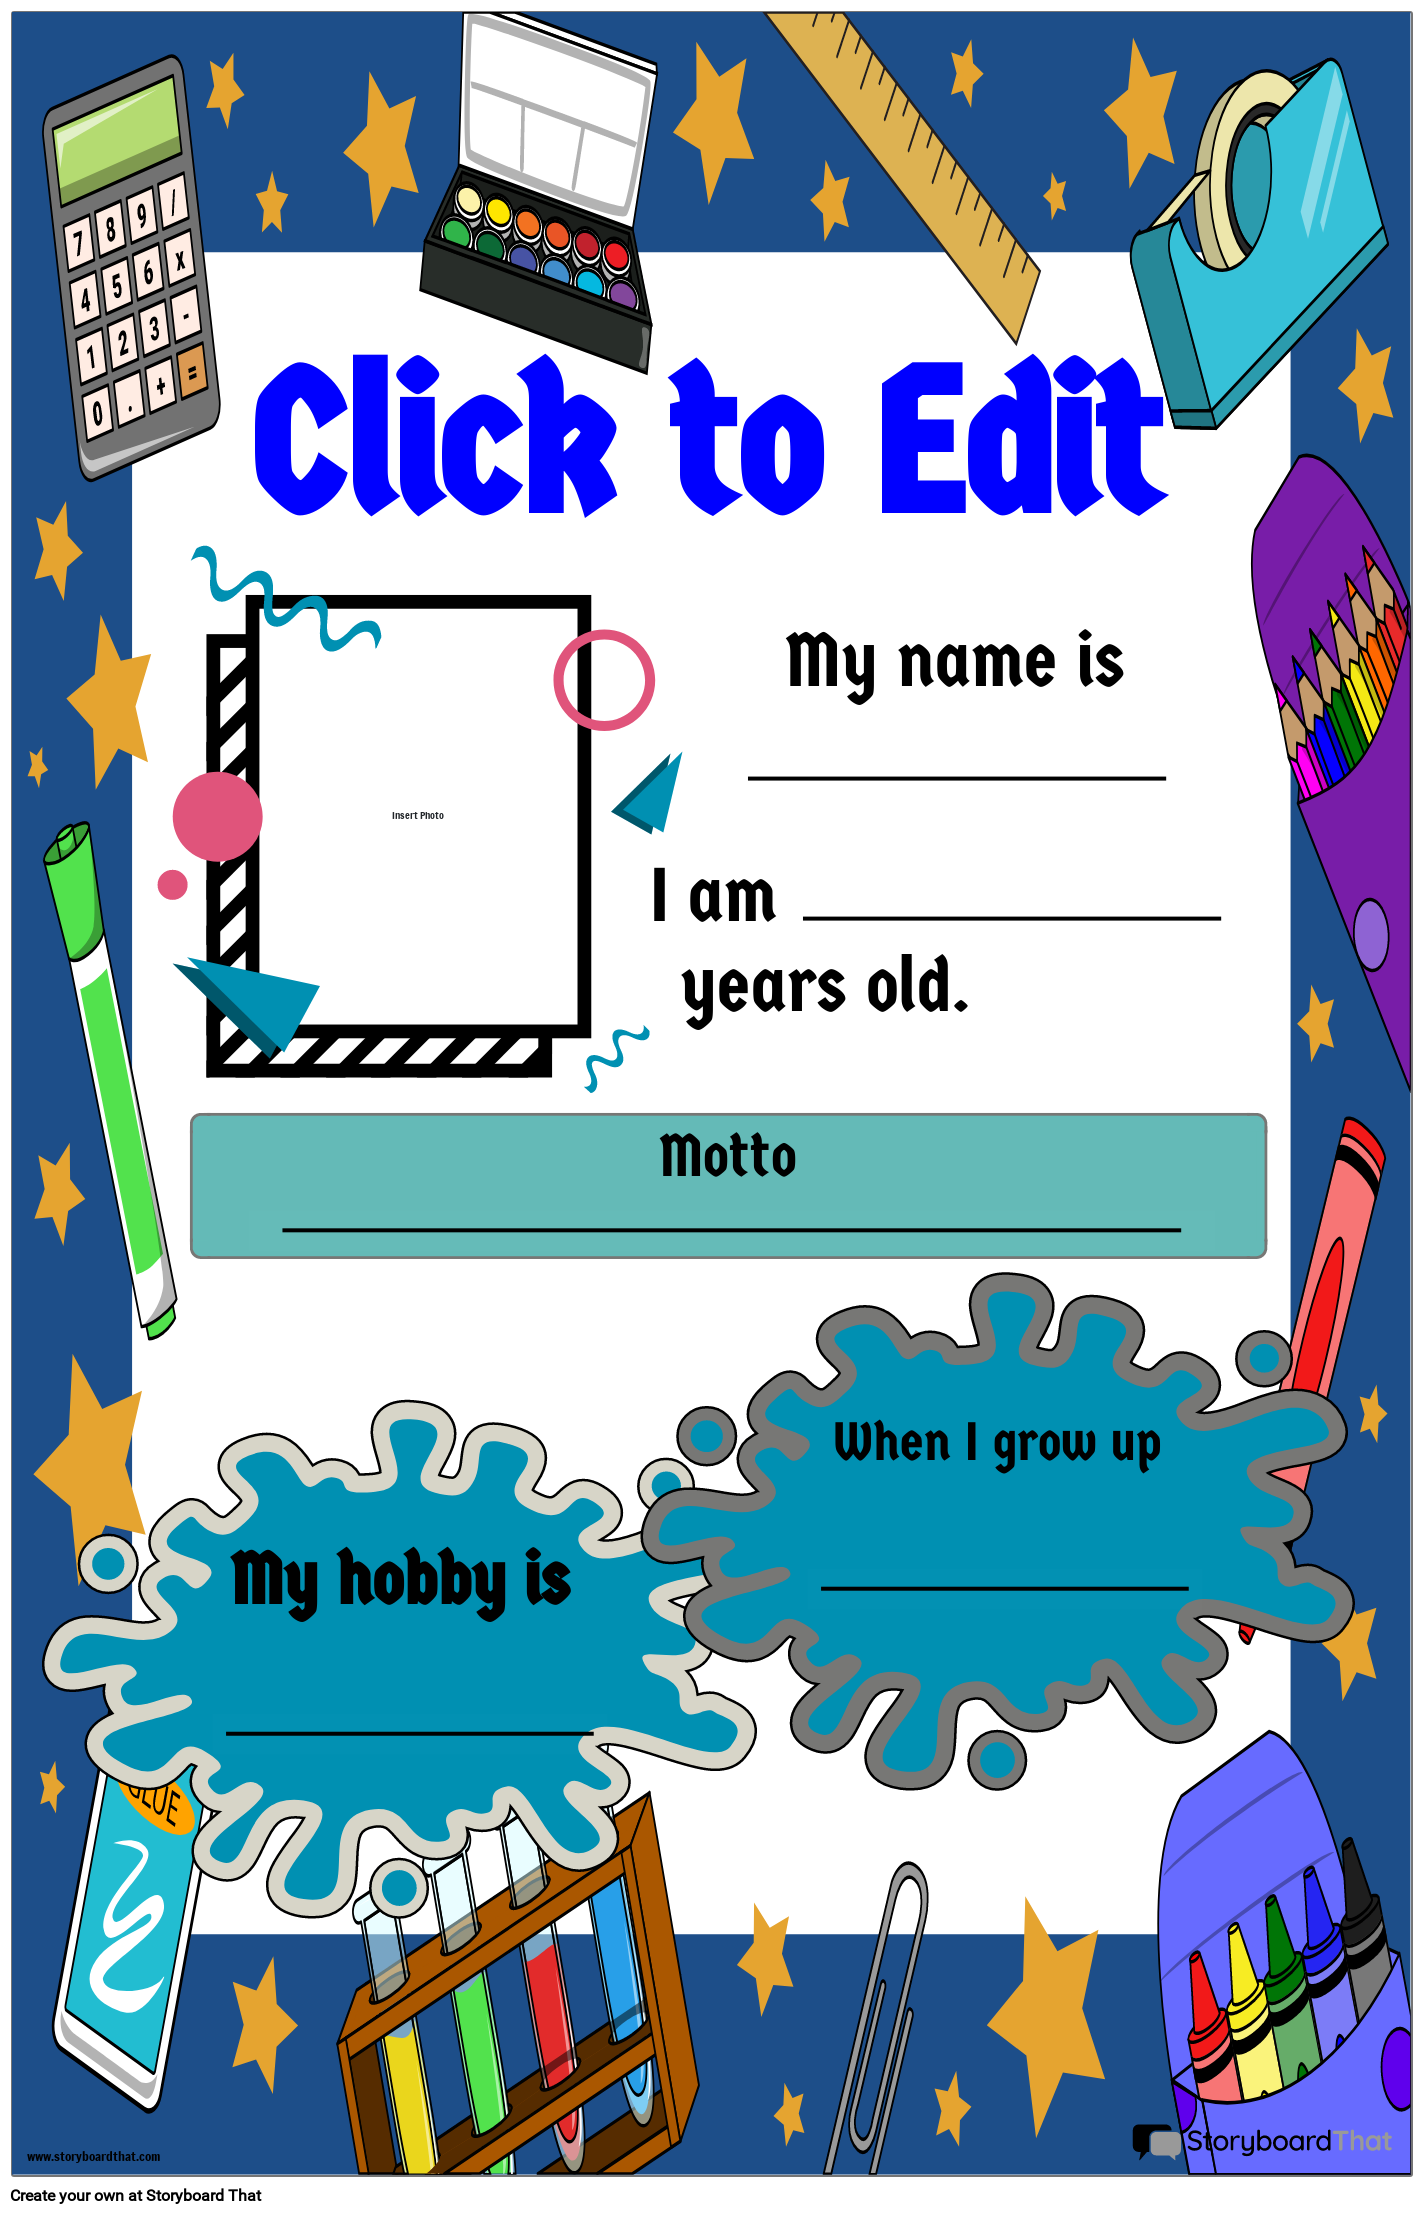 Classroom Supplies Design of Star of the Week Poster